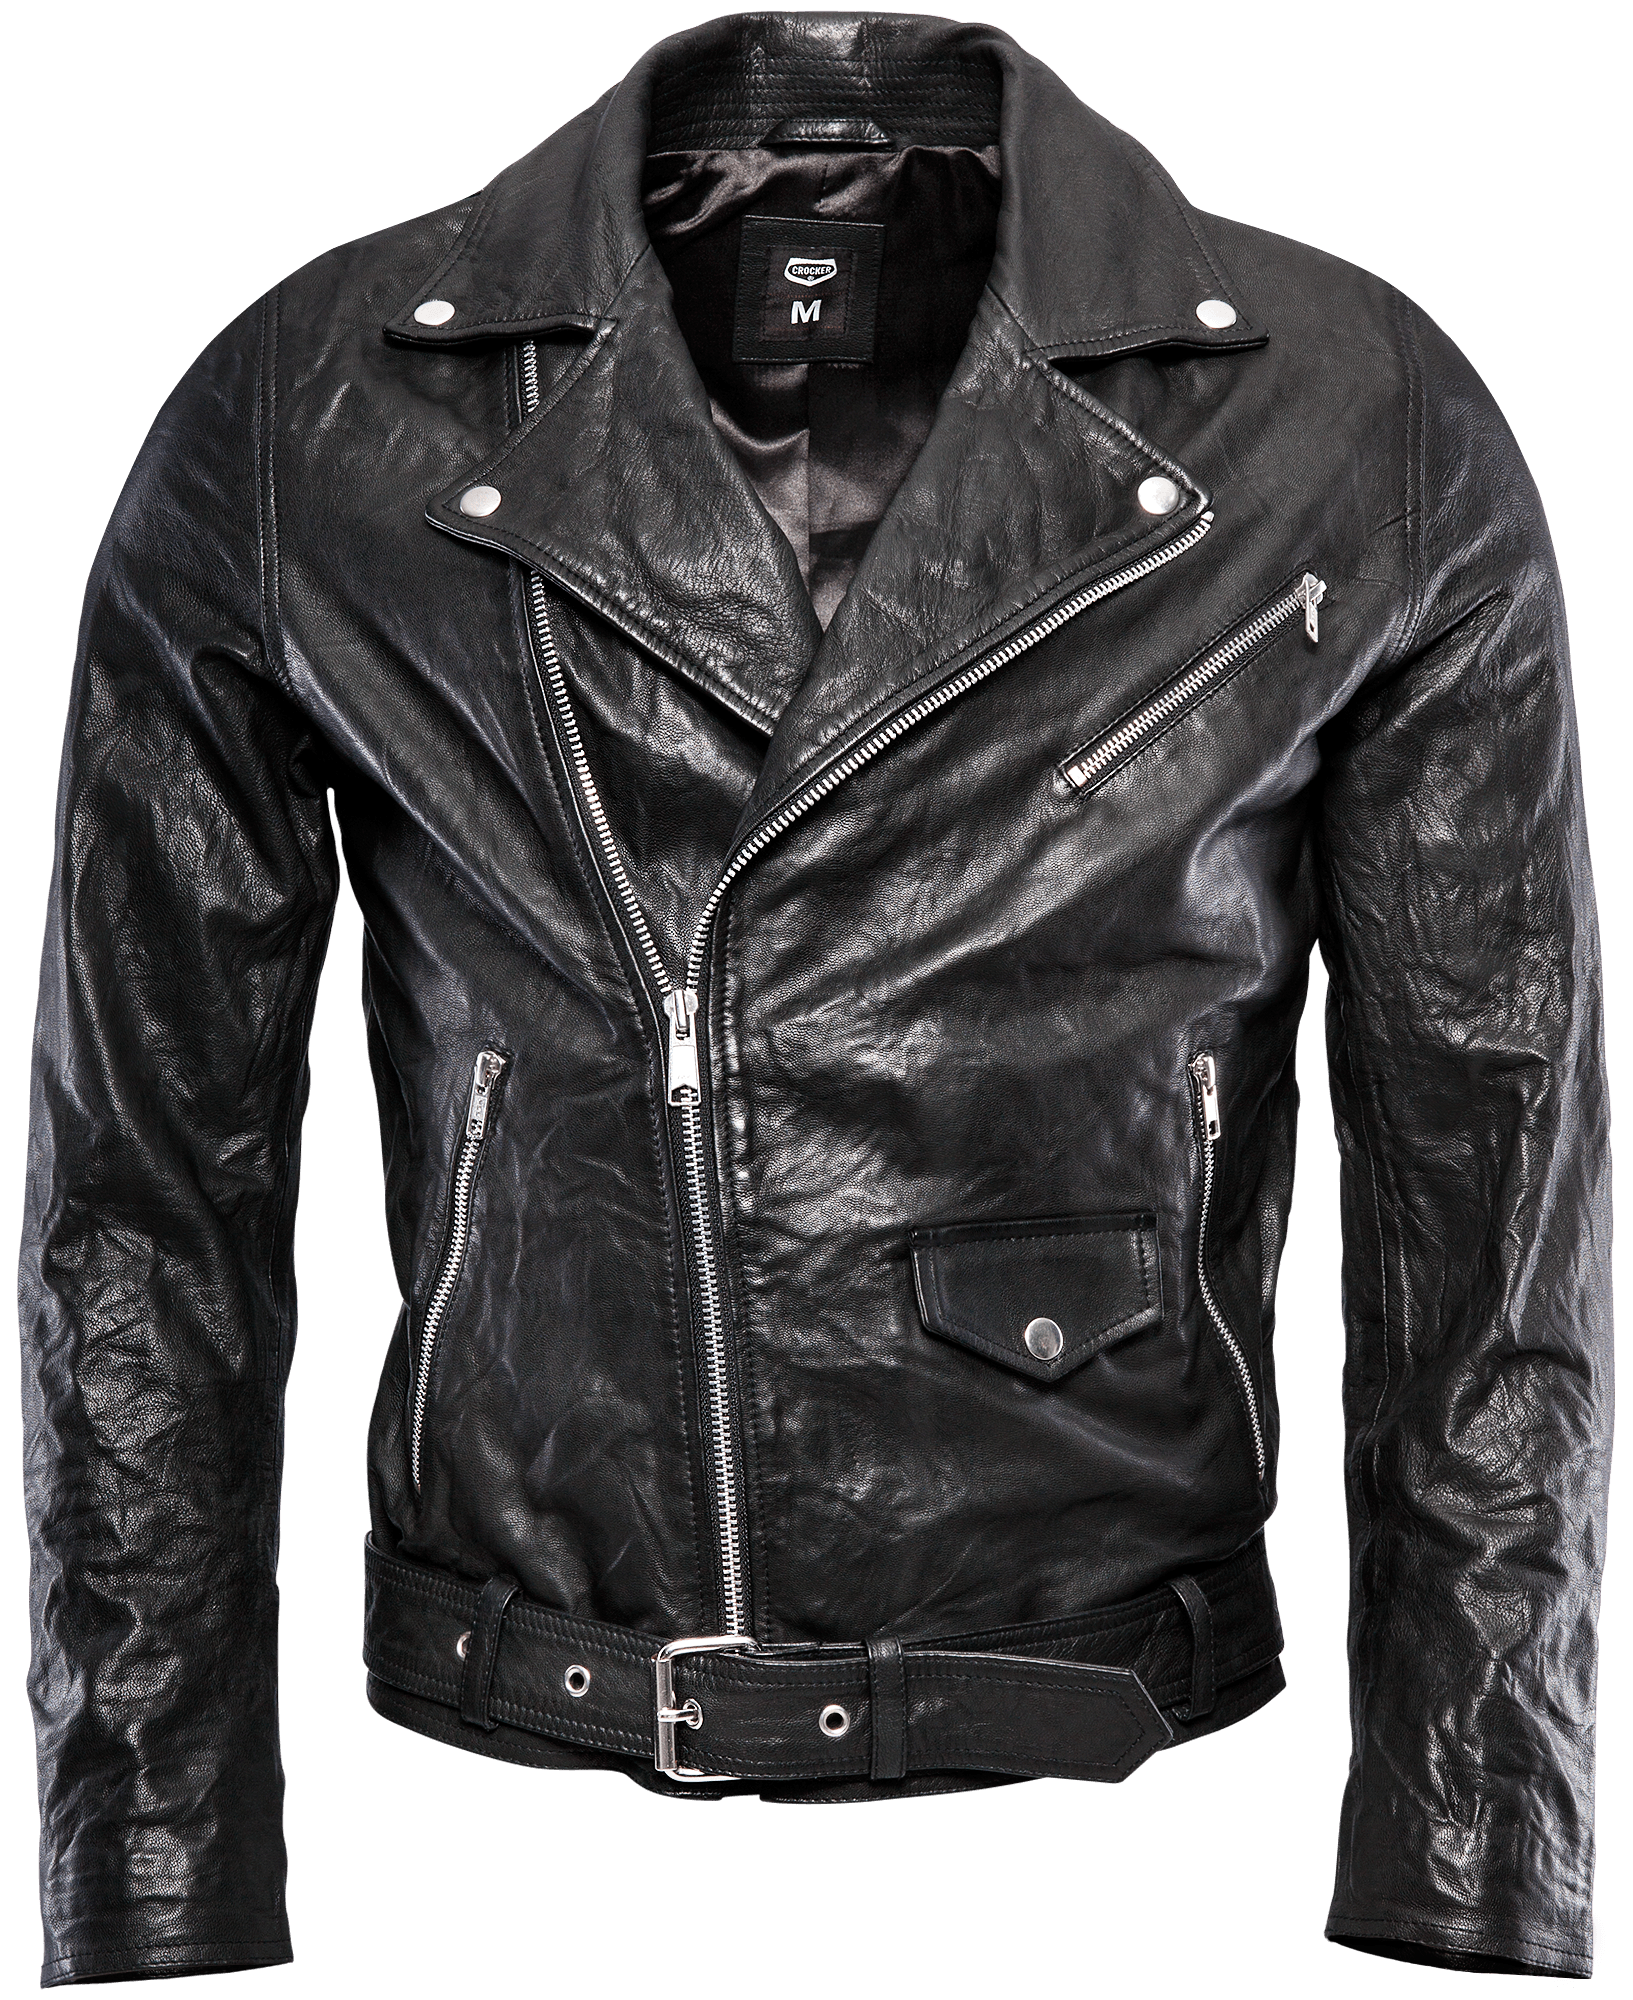 Jacket leather worn out. Zipper clipart gray